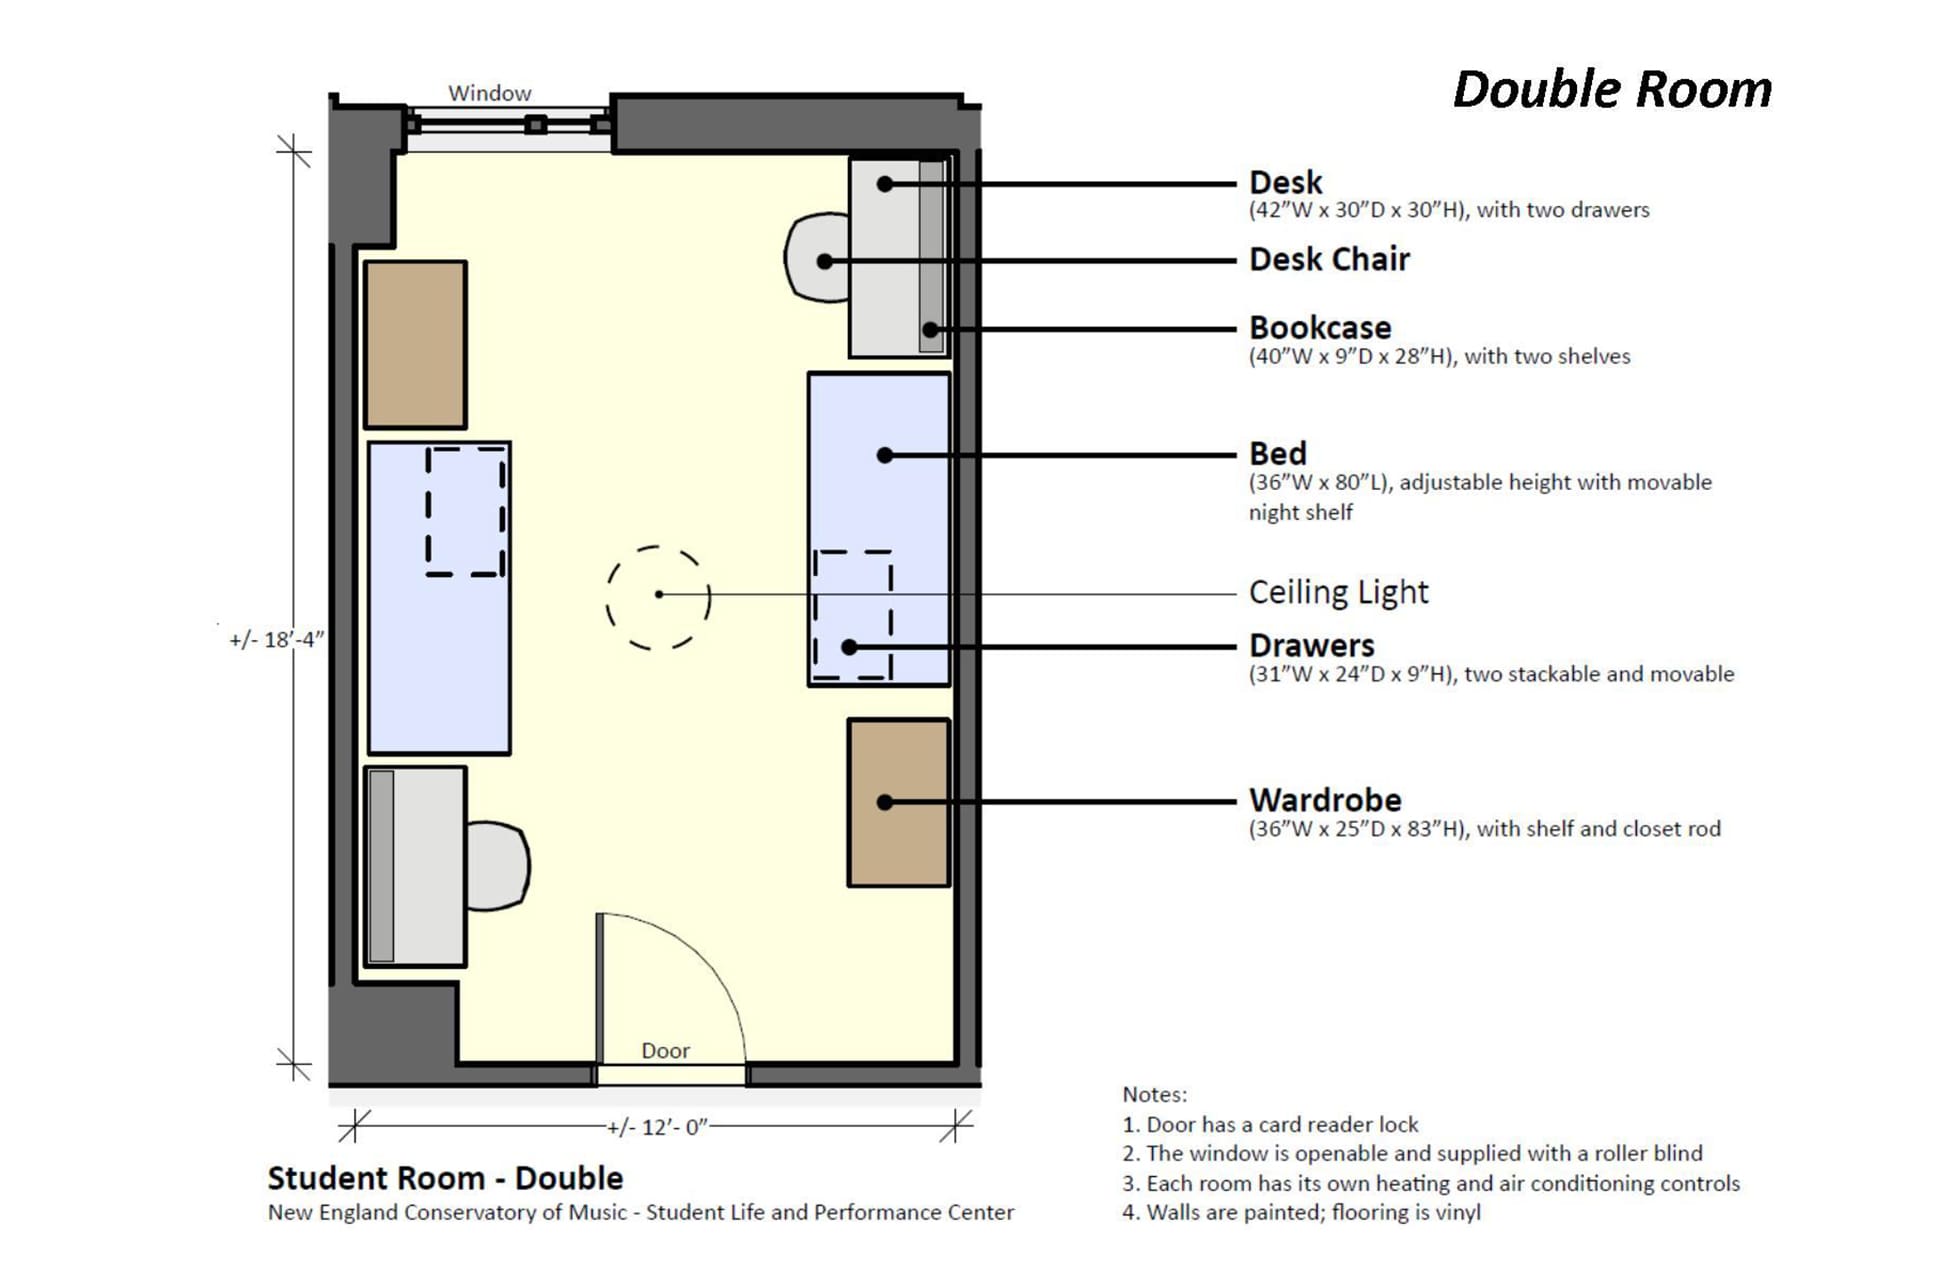 Floor plan diagram of a double residency room in the NEC residence hall.